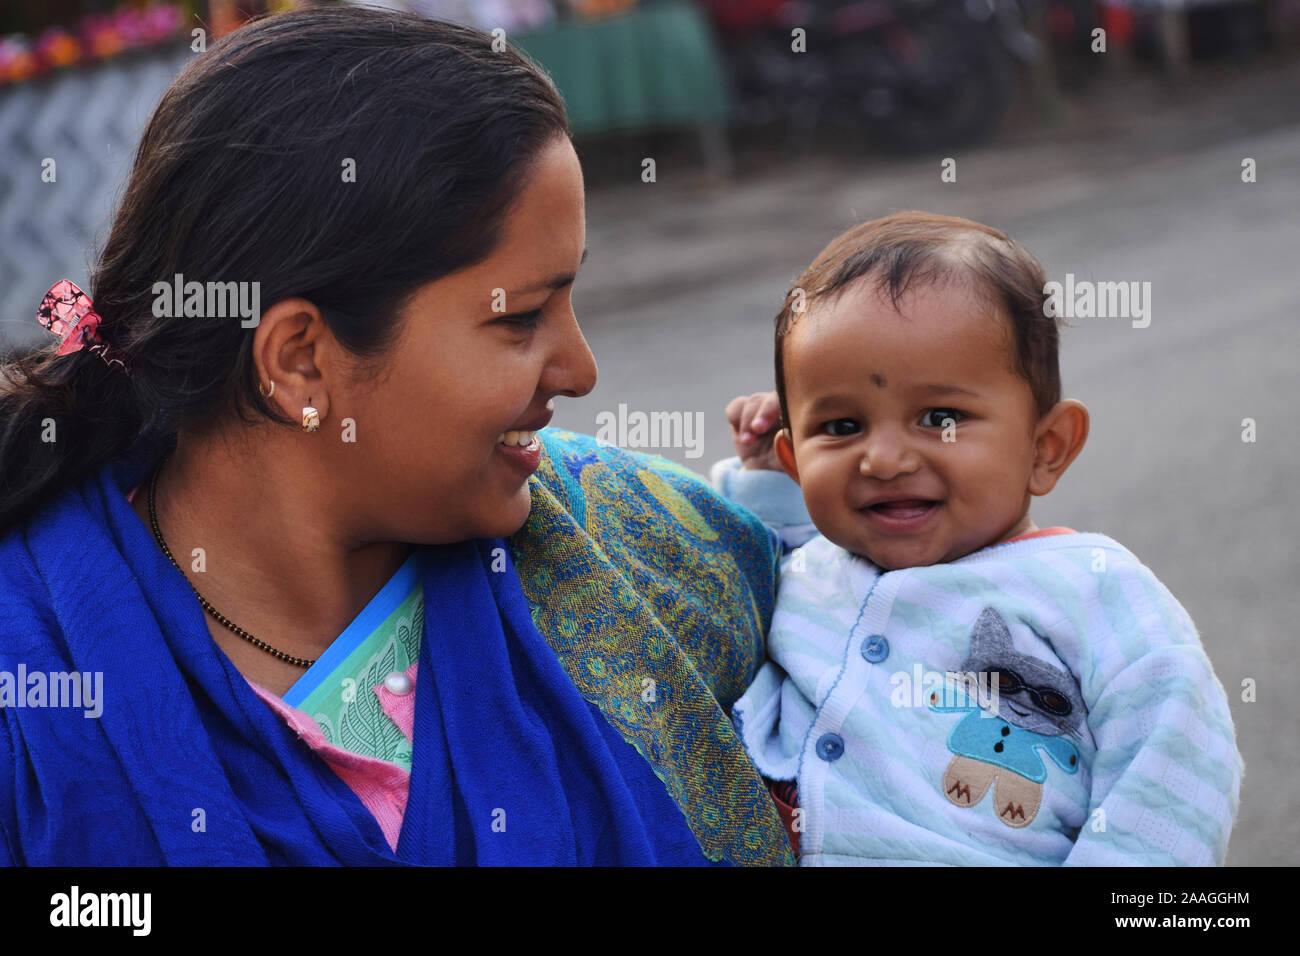 Cute Baby Boy with mother smiling at camera, Assam, Inde Banque D'Images